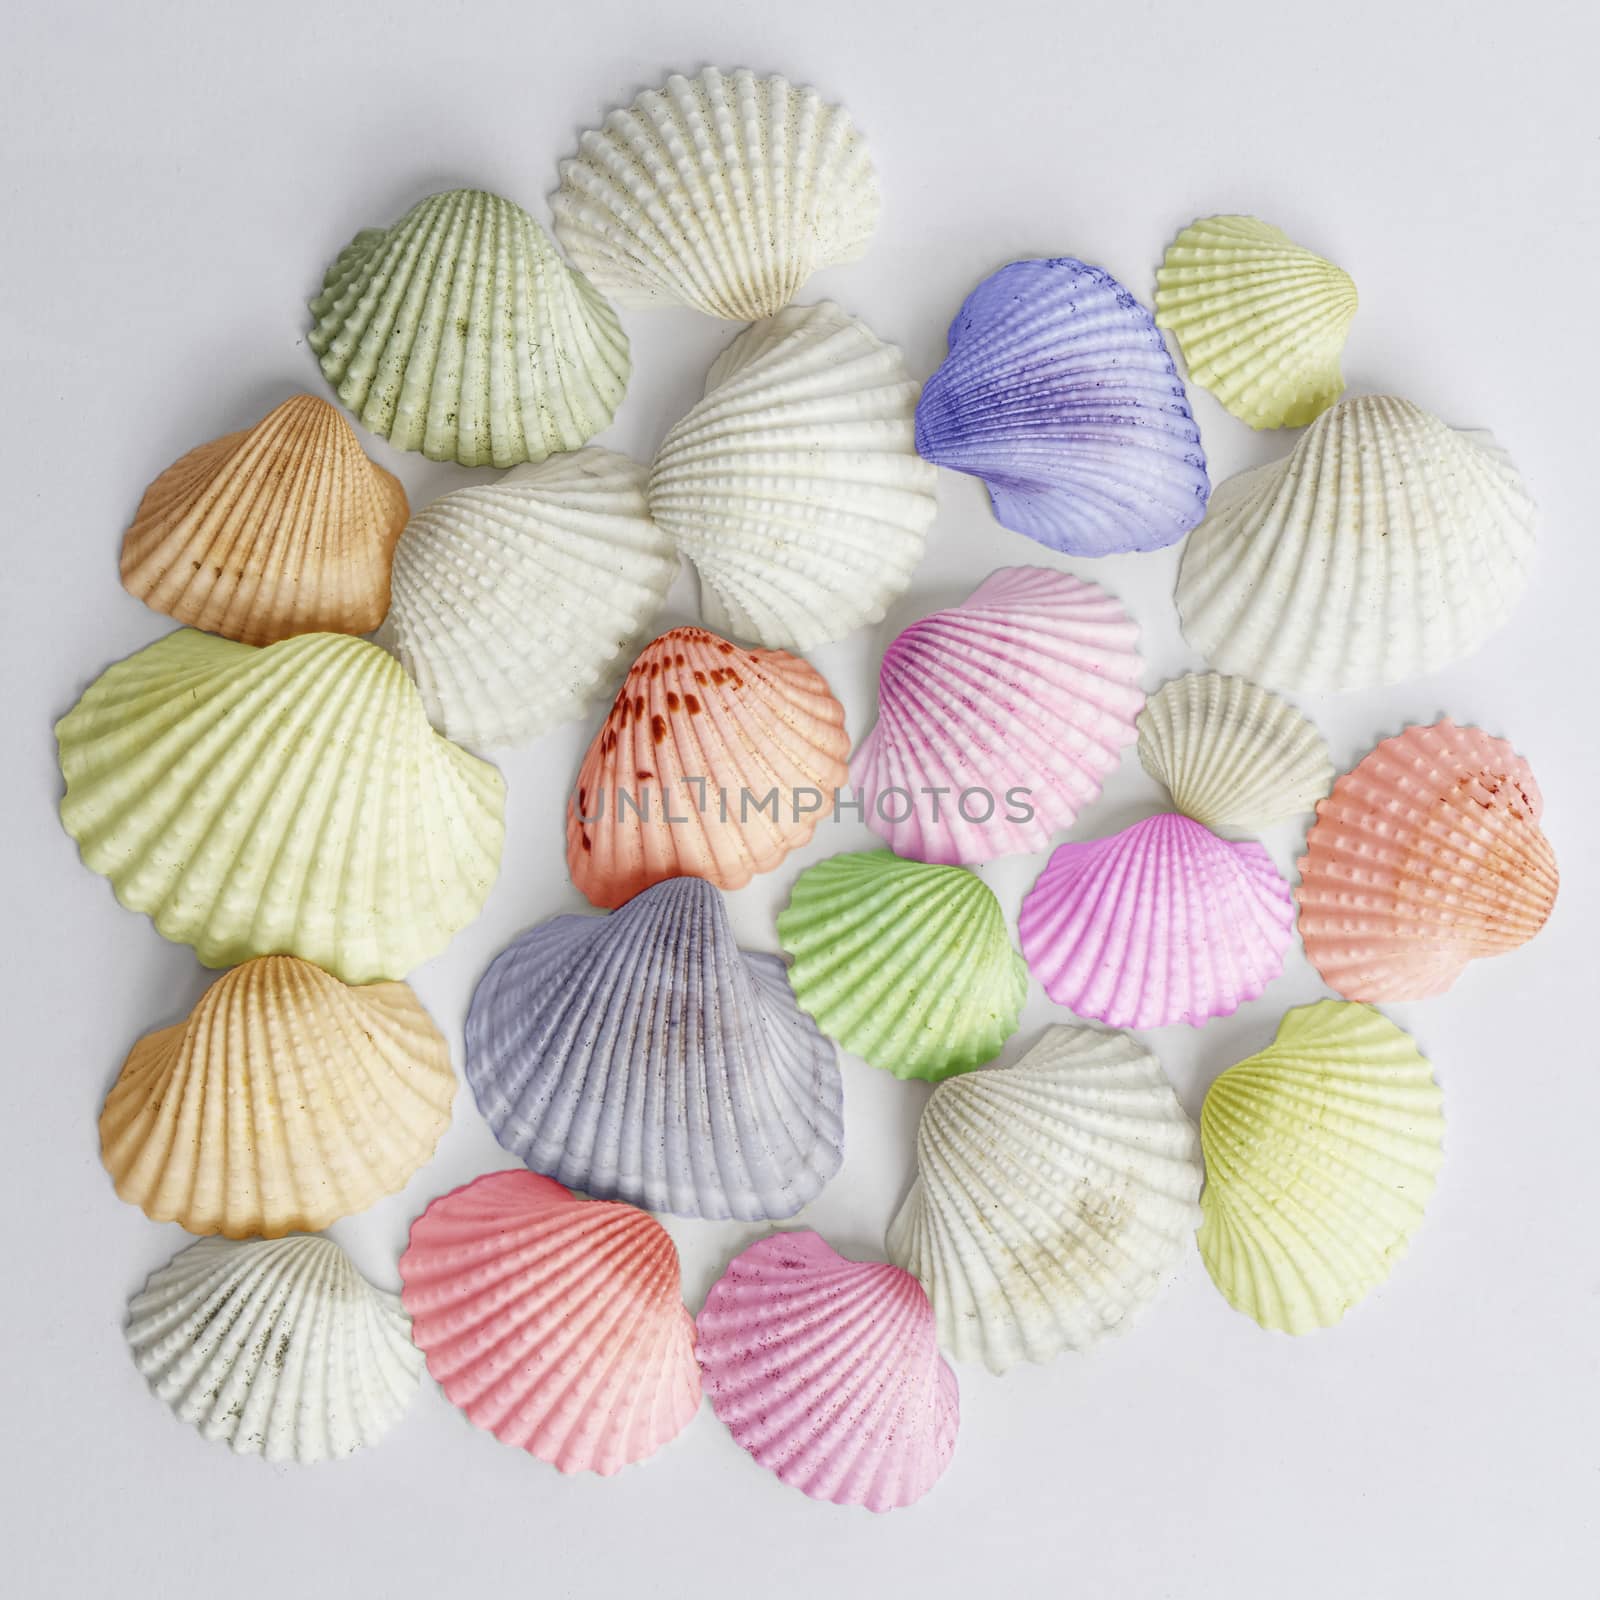 some colorful shells on a surface